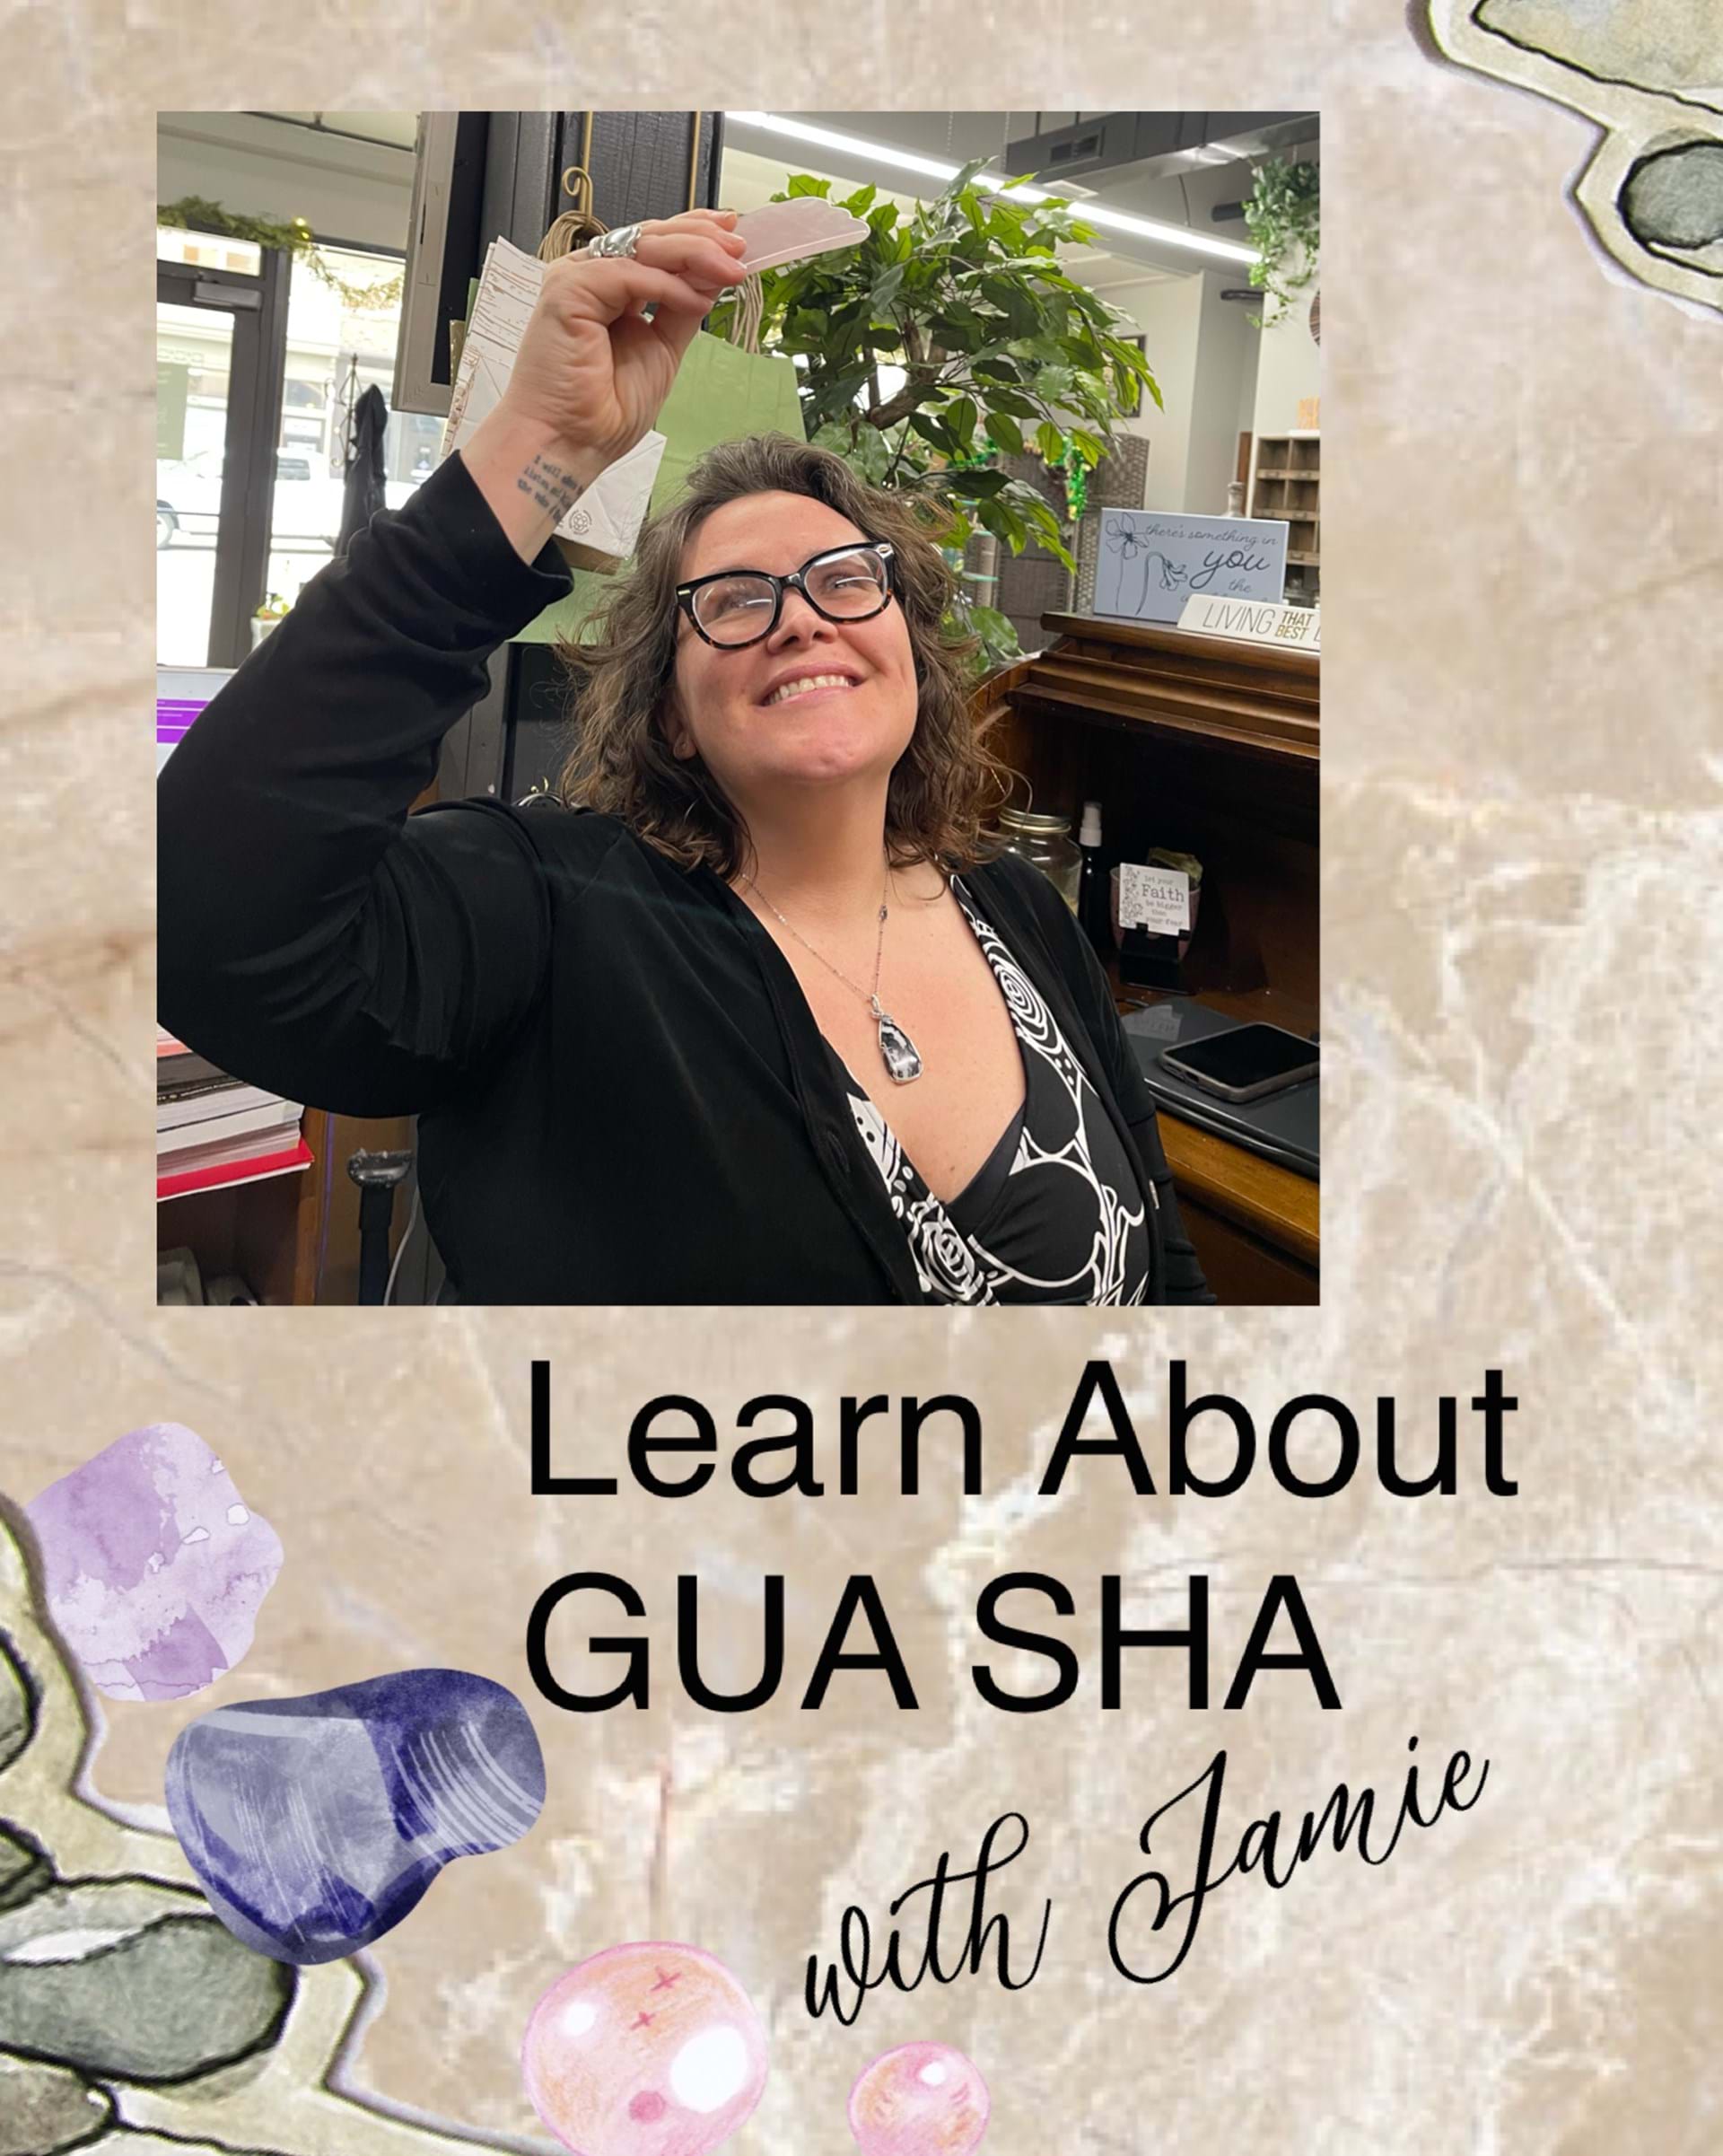 Jamie is our Facial Artisan with special certification in Gua Sha